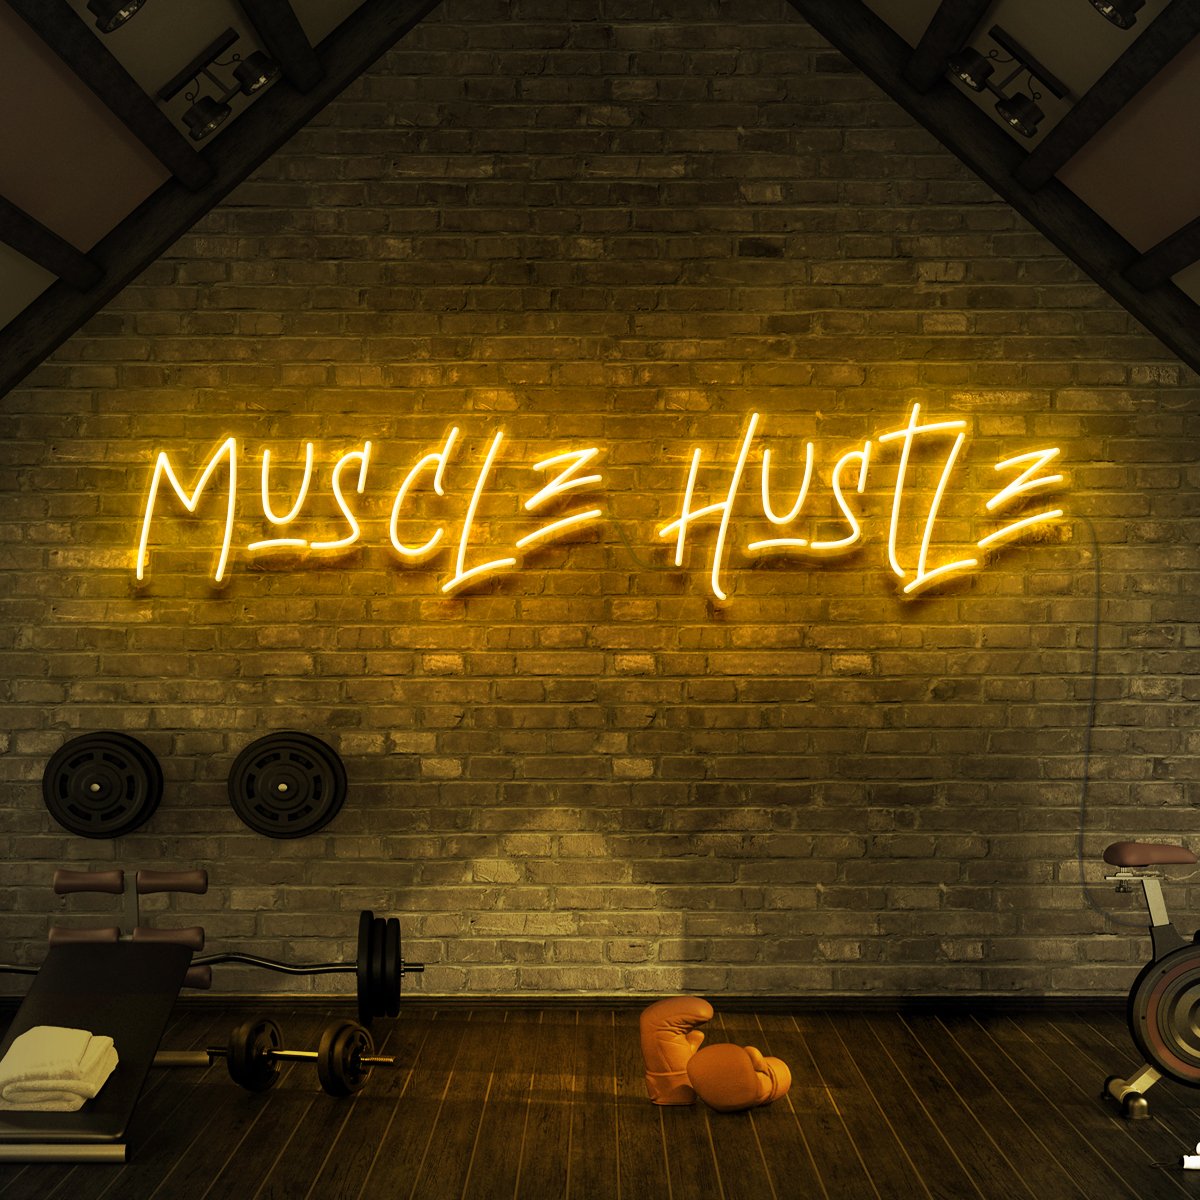 "Muscle Hustle" Neon Sign for Gyms & Fitness Studios by Neon Icons